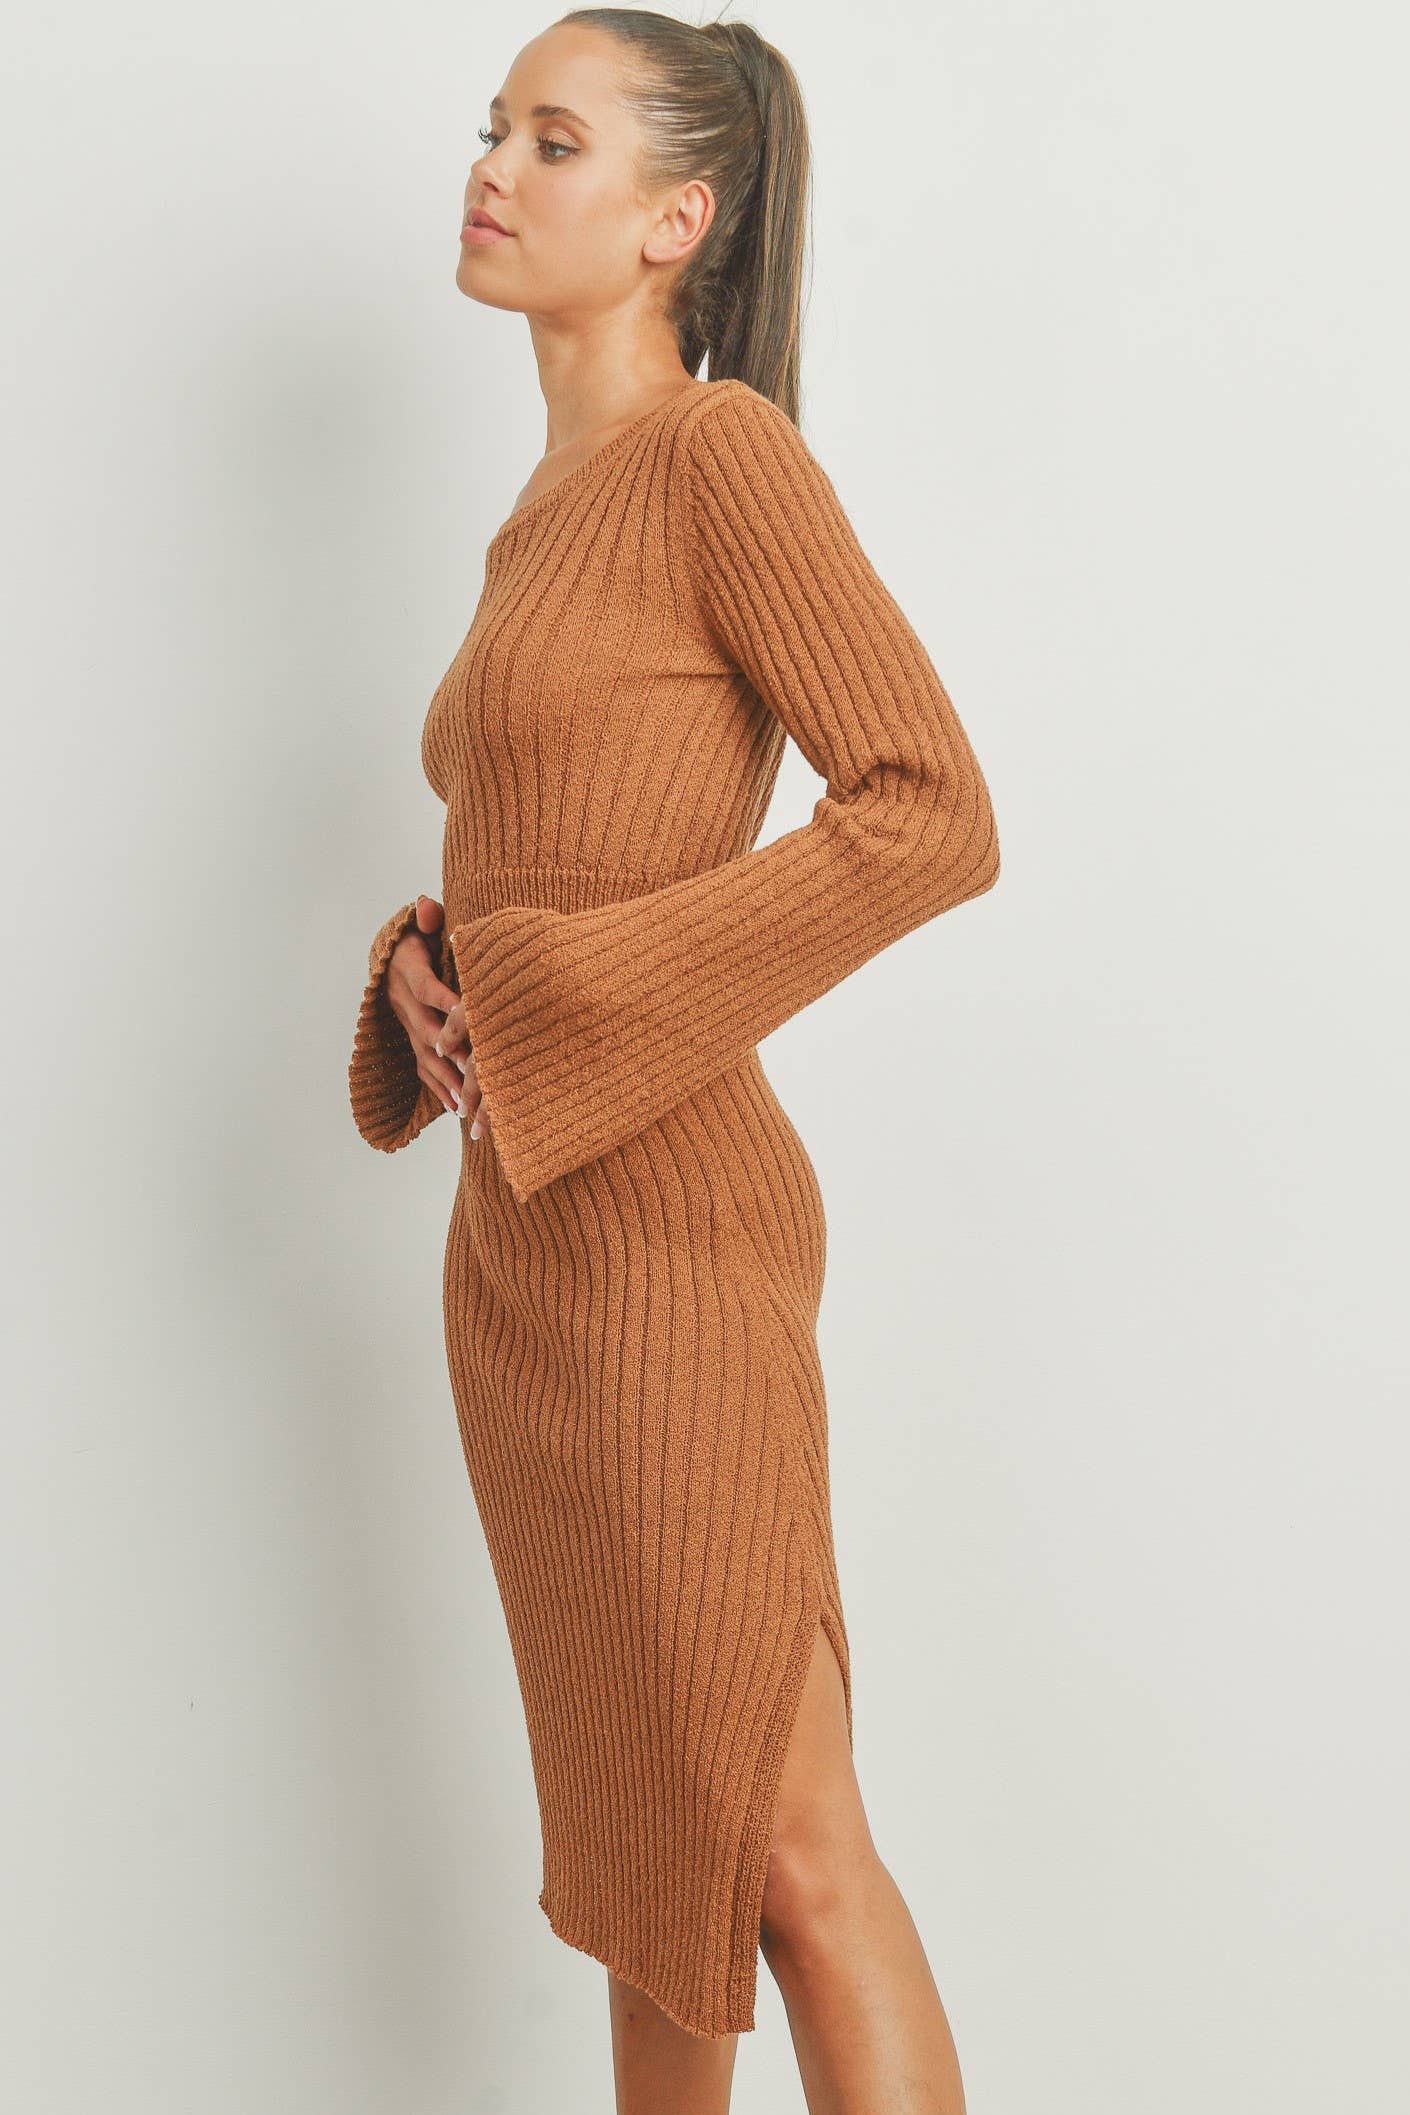 Butter Melon: BELL SLEEVE BROWN SOLID RIB SWEATER TOP AND SKIRT SET